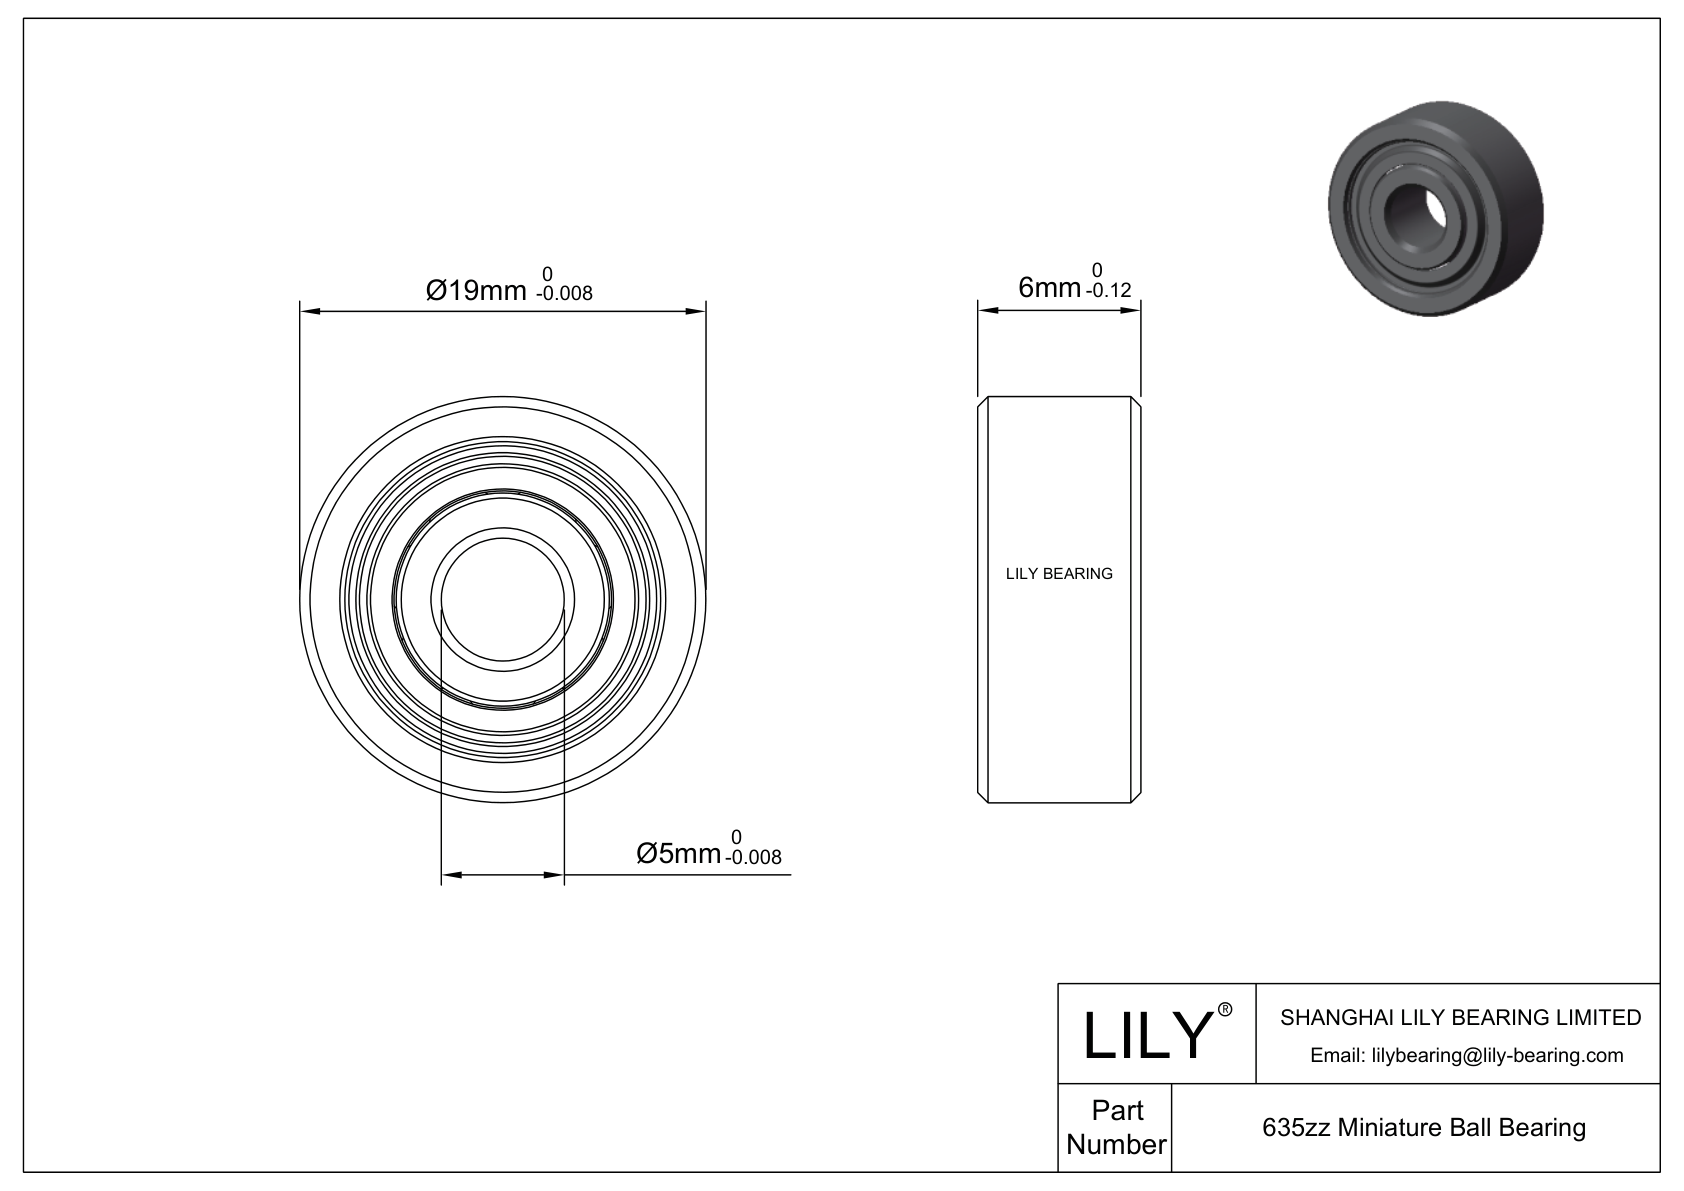 LILY-BST63535-30 Outsourcing POM bearings cad drawing